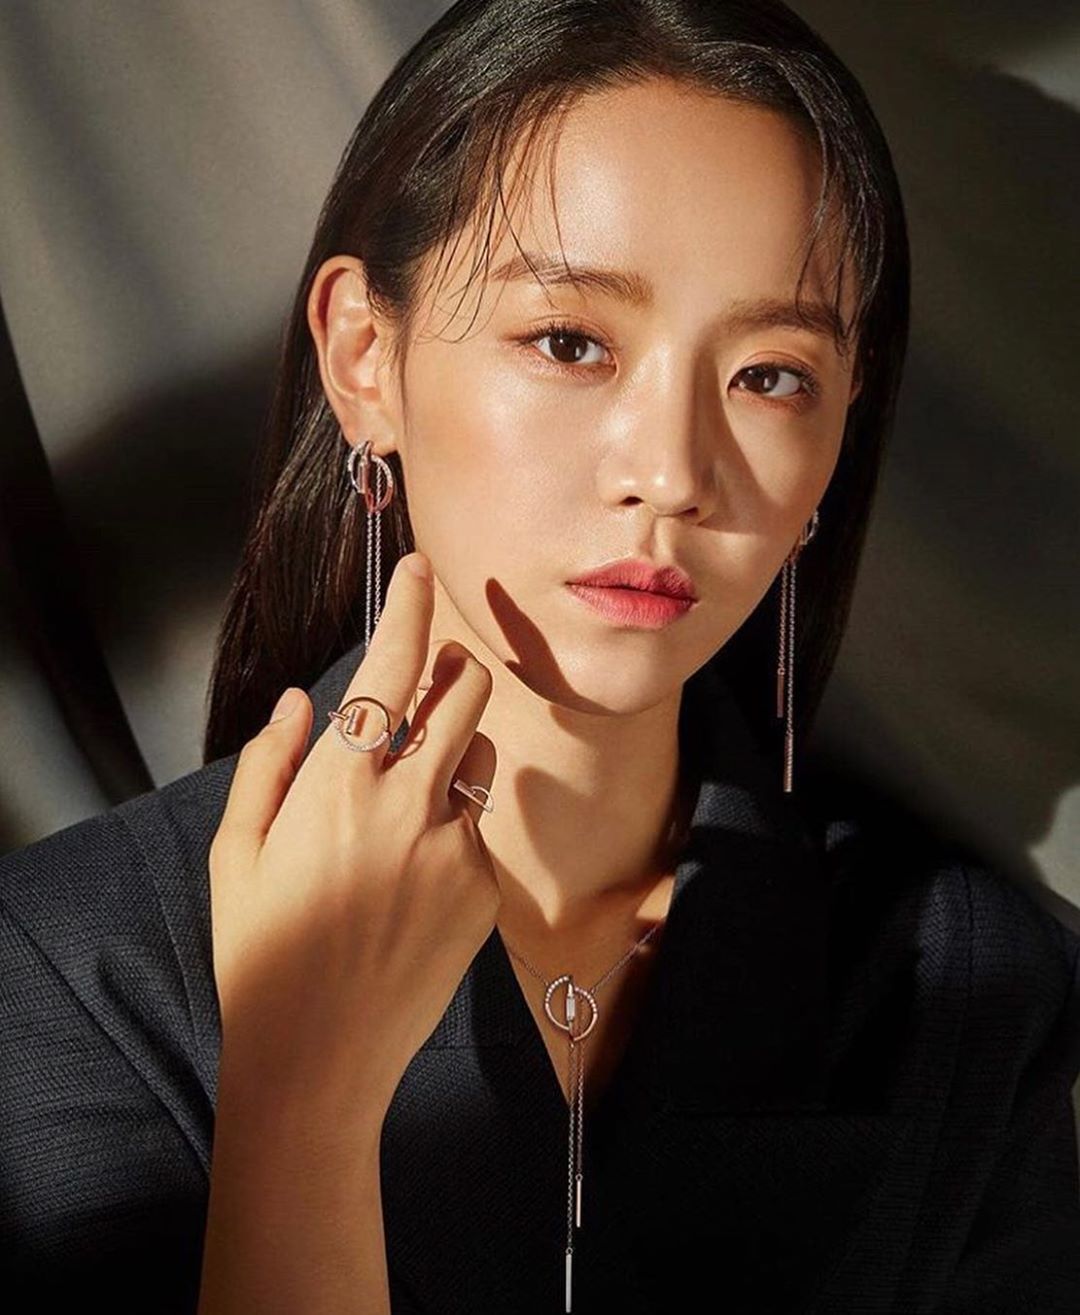 Shin Hye Sun Pictures For October 1, 2019.